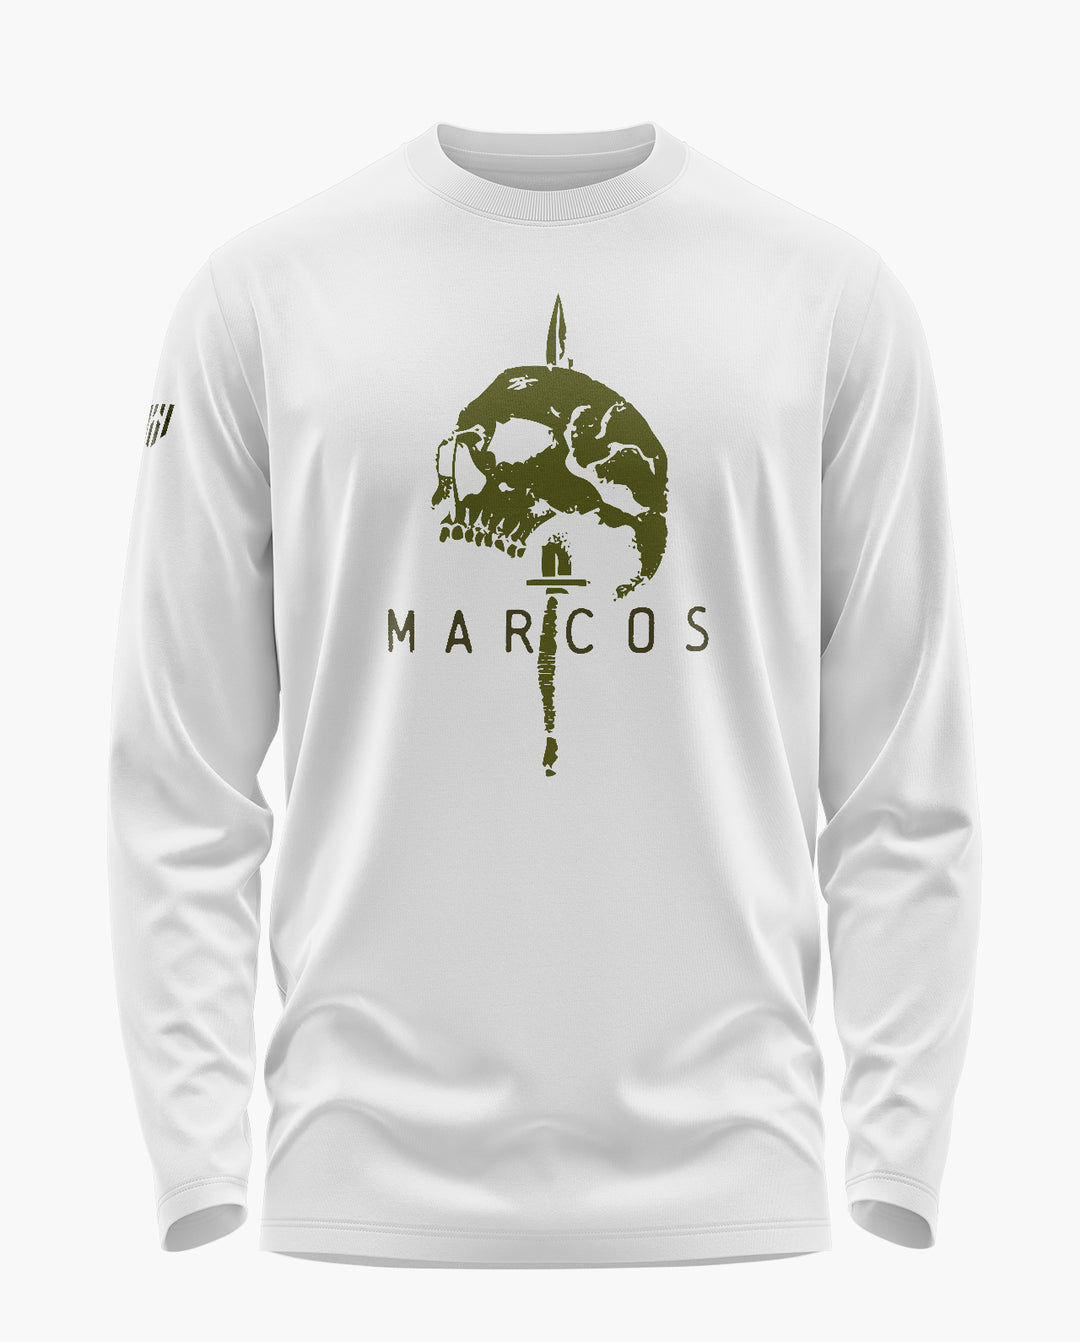 MARCOS SUPREMACY Full Sleeve T-Shirt